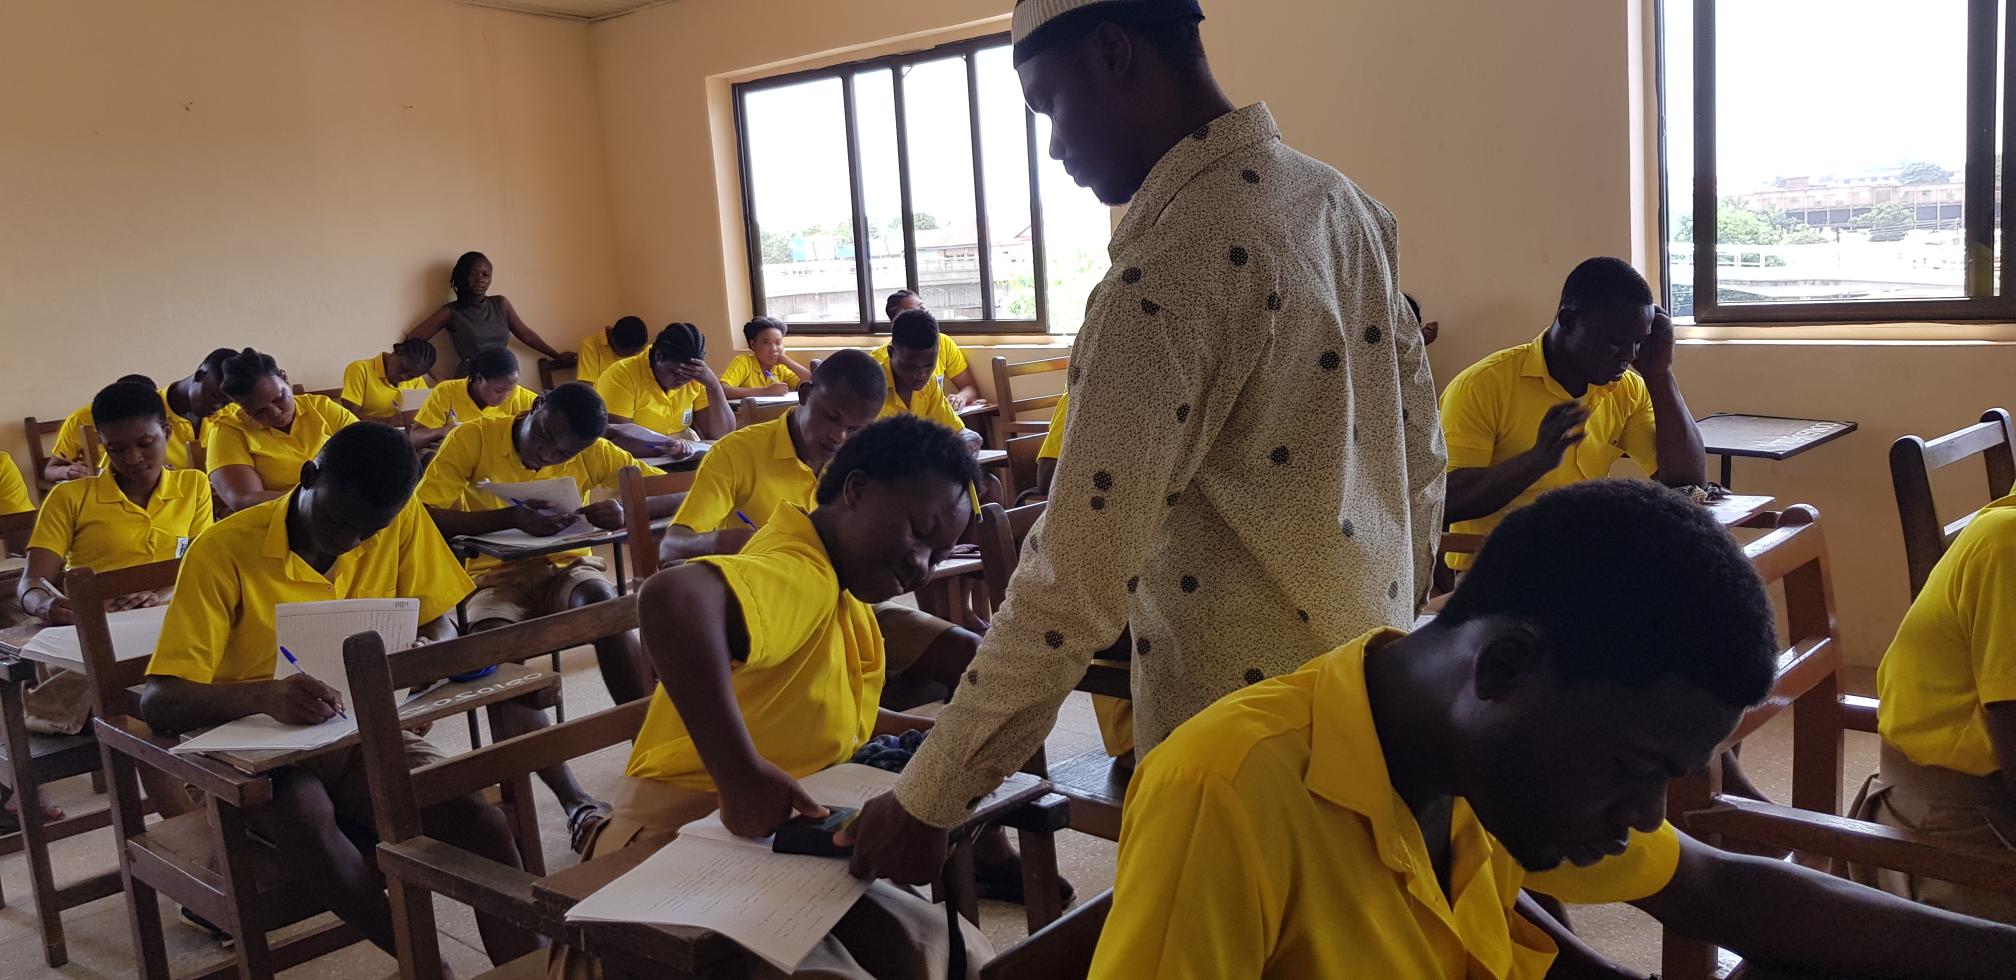 Registration of Unqualified Candidates for WASSCE 2020 is Prohibited - WAEC